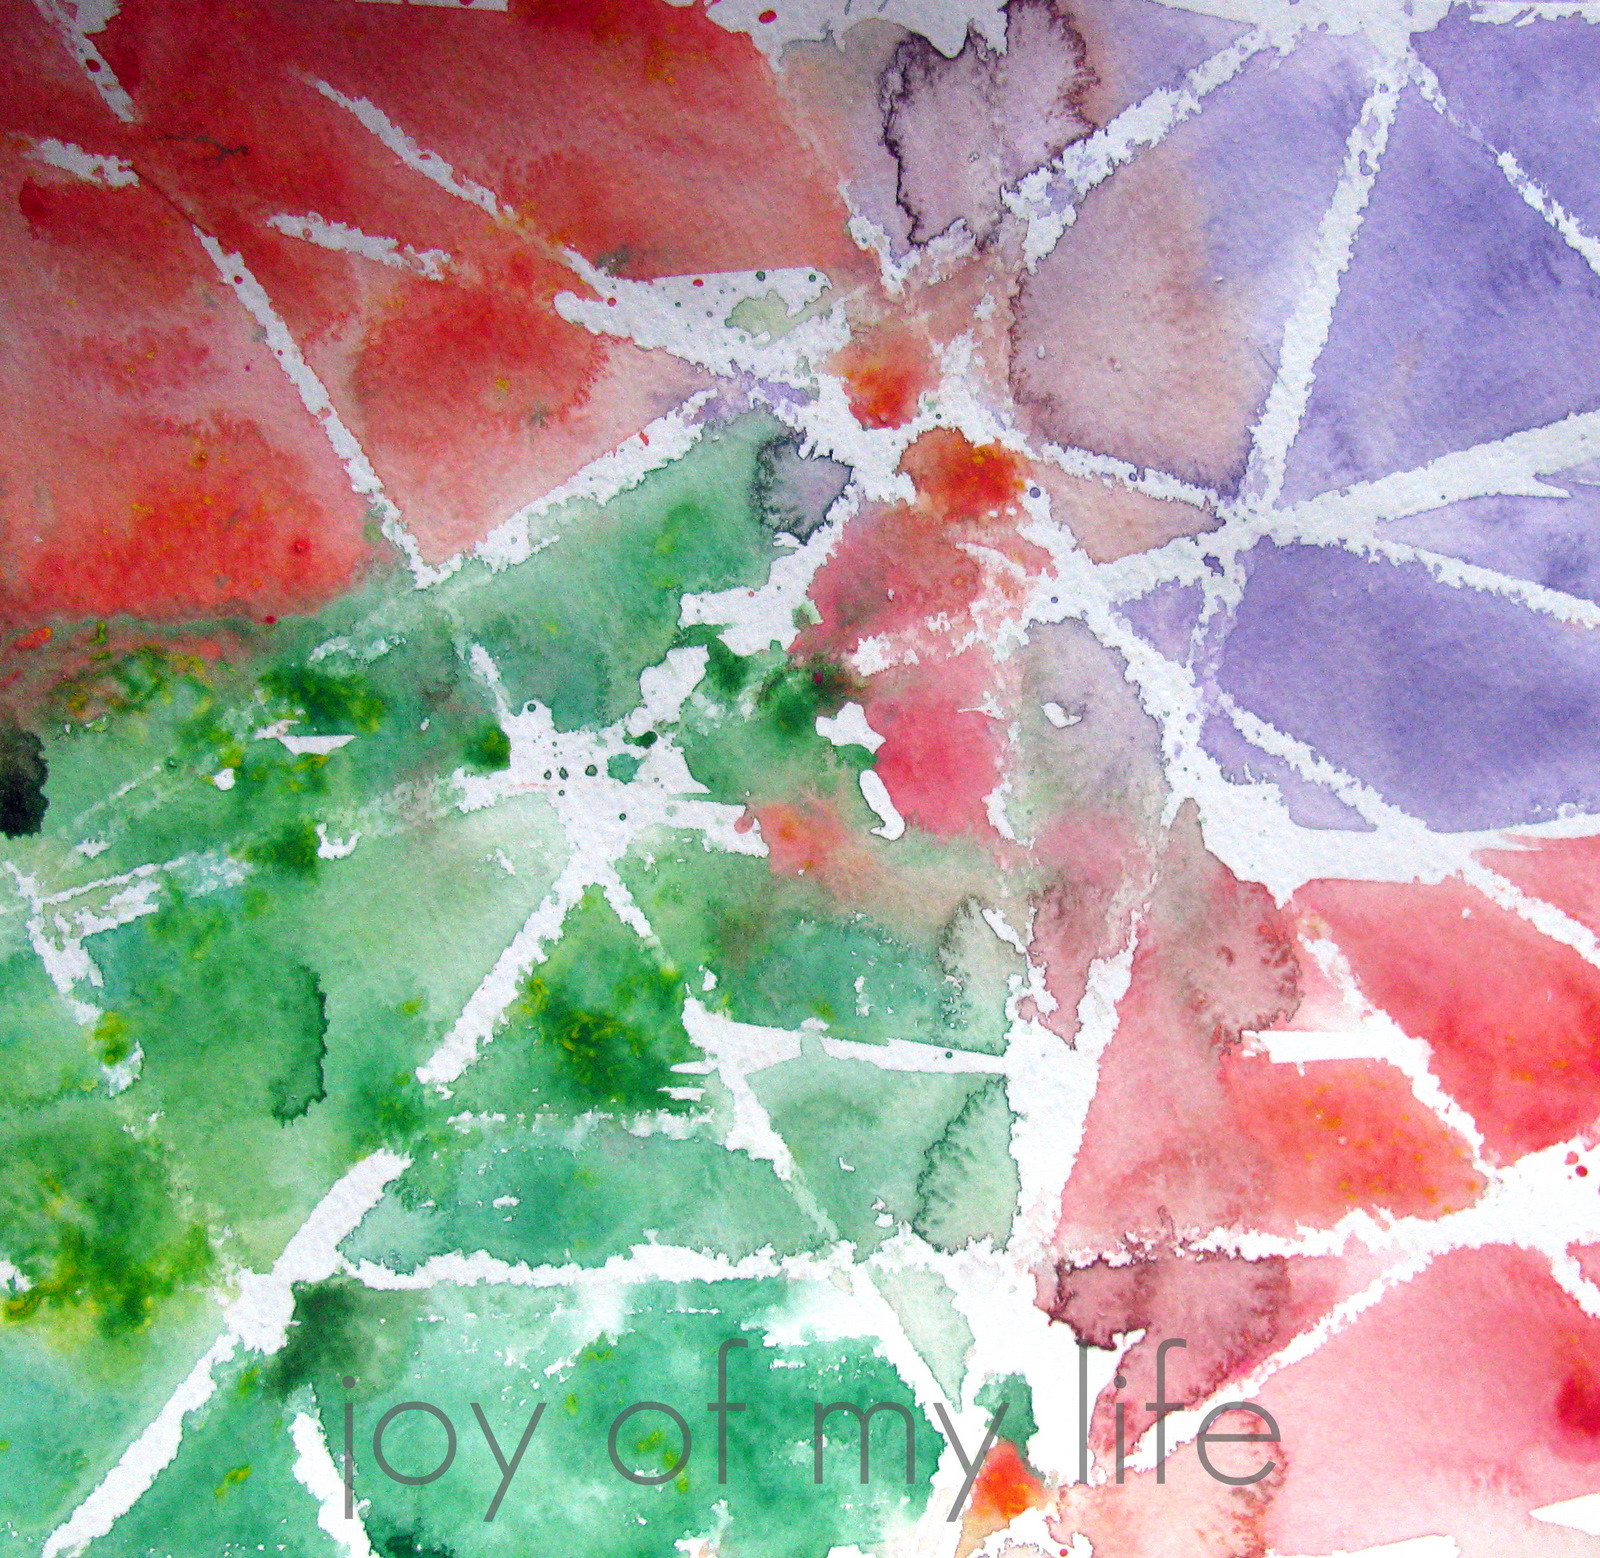 Painting: Watercolor resist with white oil pastel lines. 